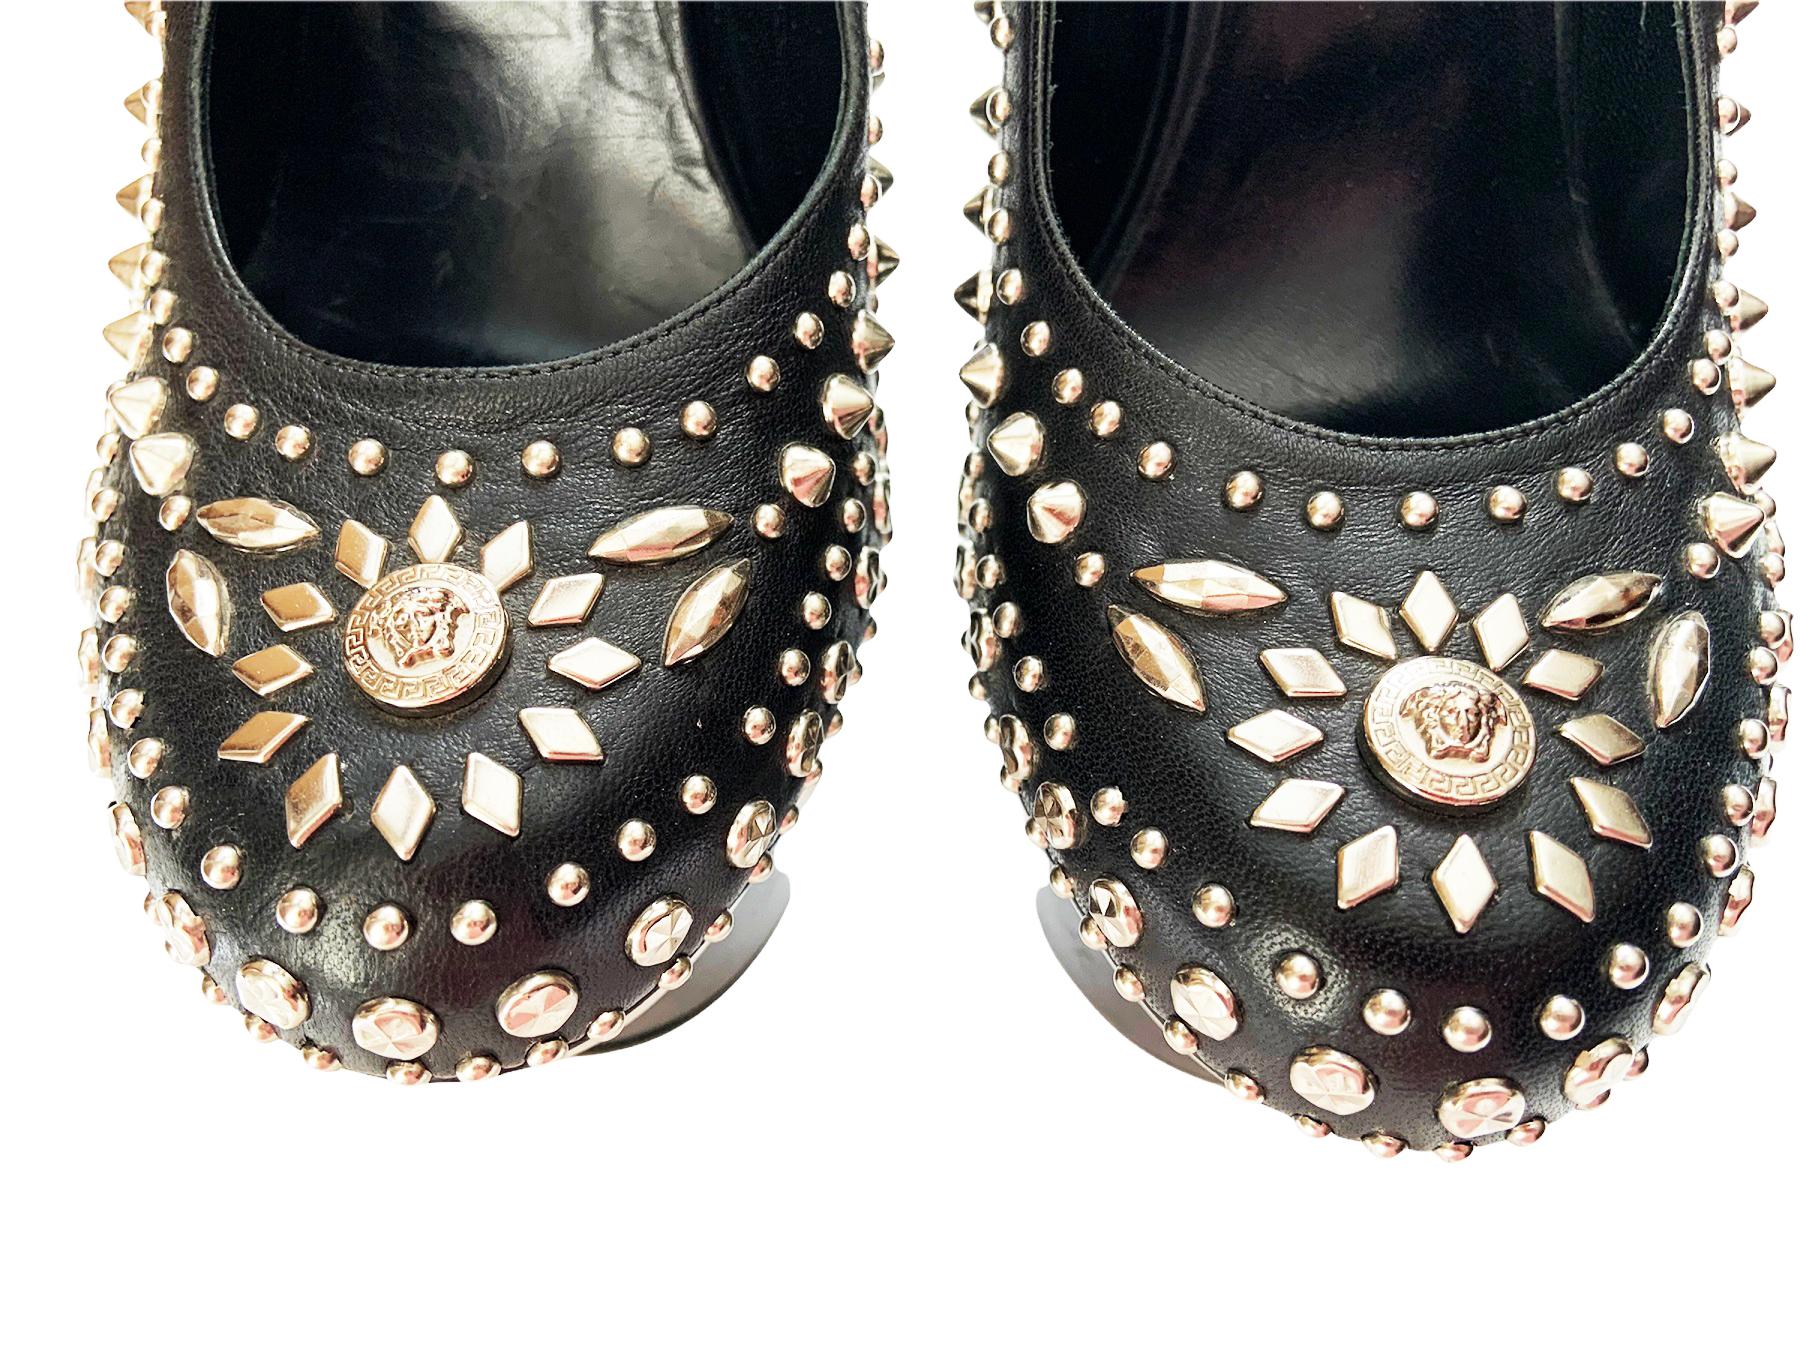 New $2650 Versace Triple Platform Silver Black Leather Studded Shoes Pumps 38 8 In New Condition For Sale In Montgomery, TX